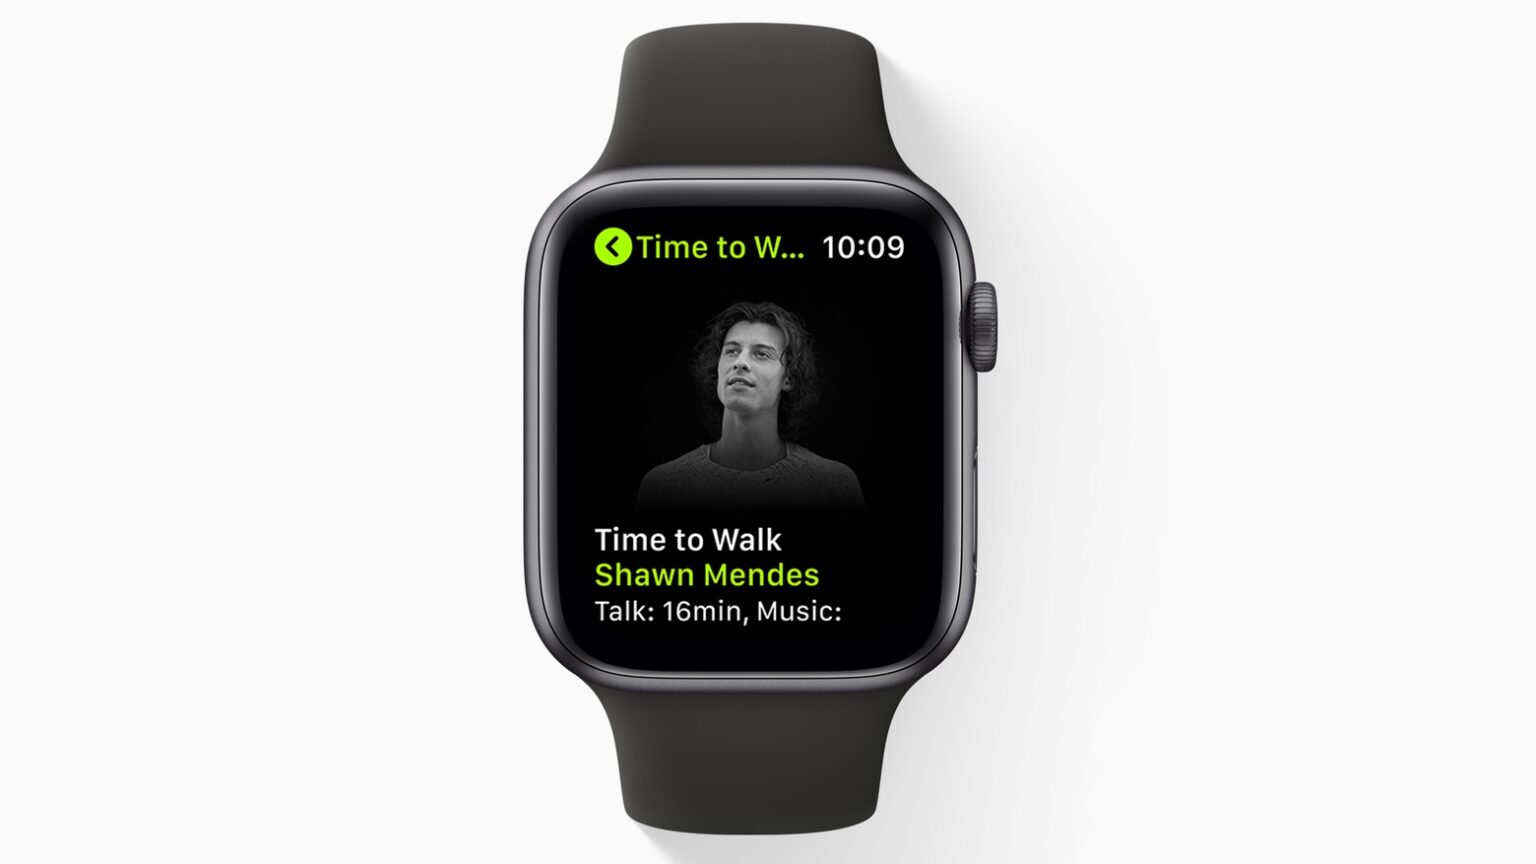 watchOS 7.3 brings several new features to Apple Watch, including Time to Walk